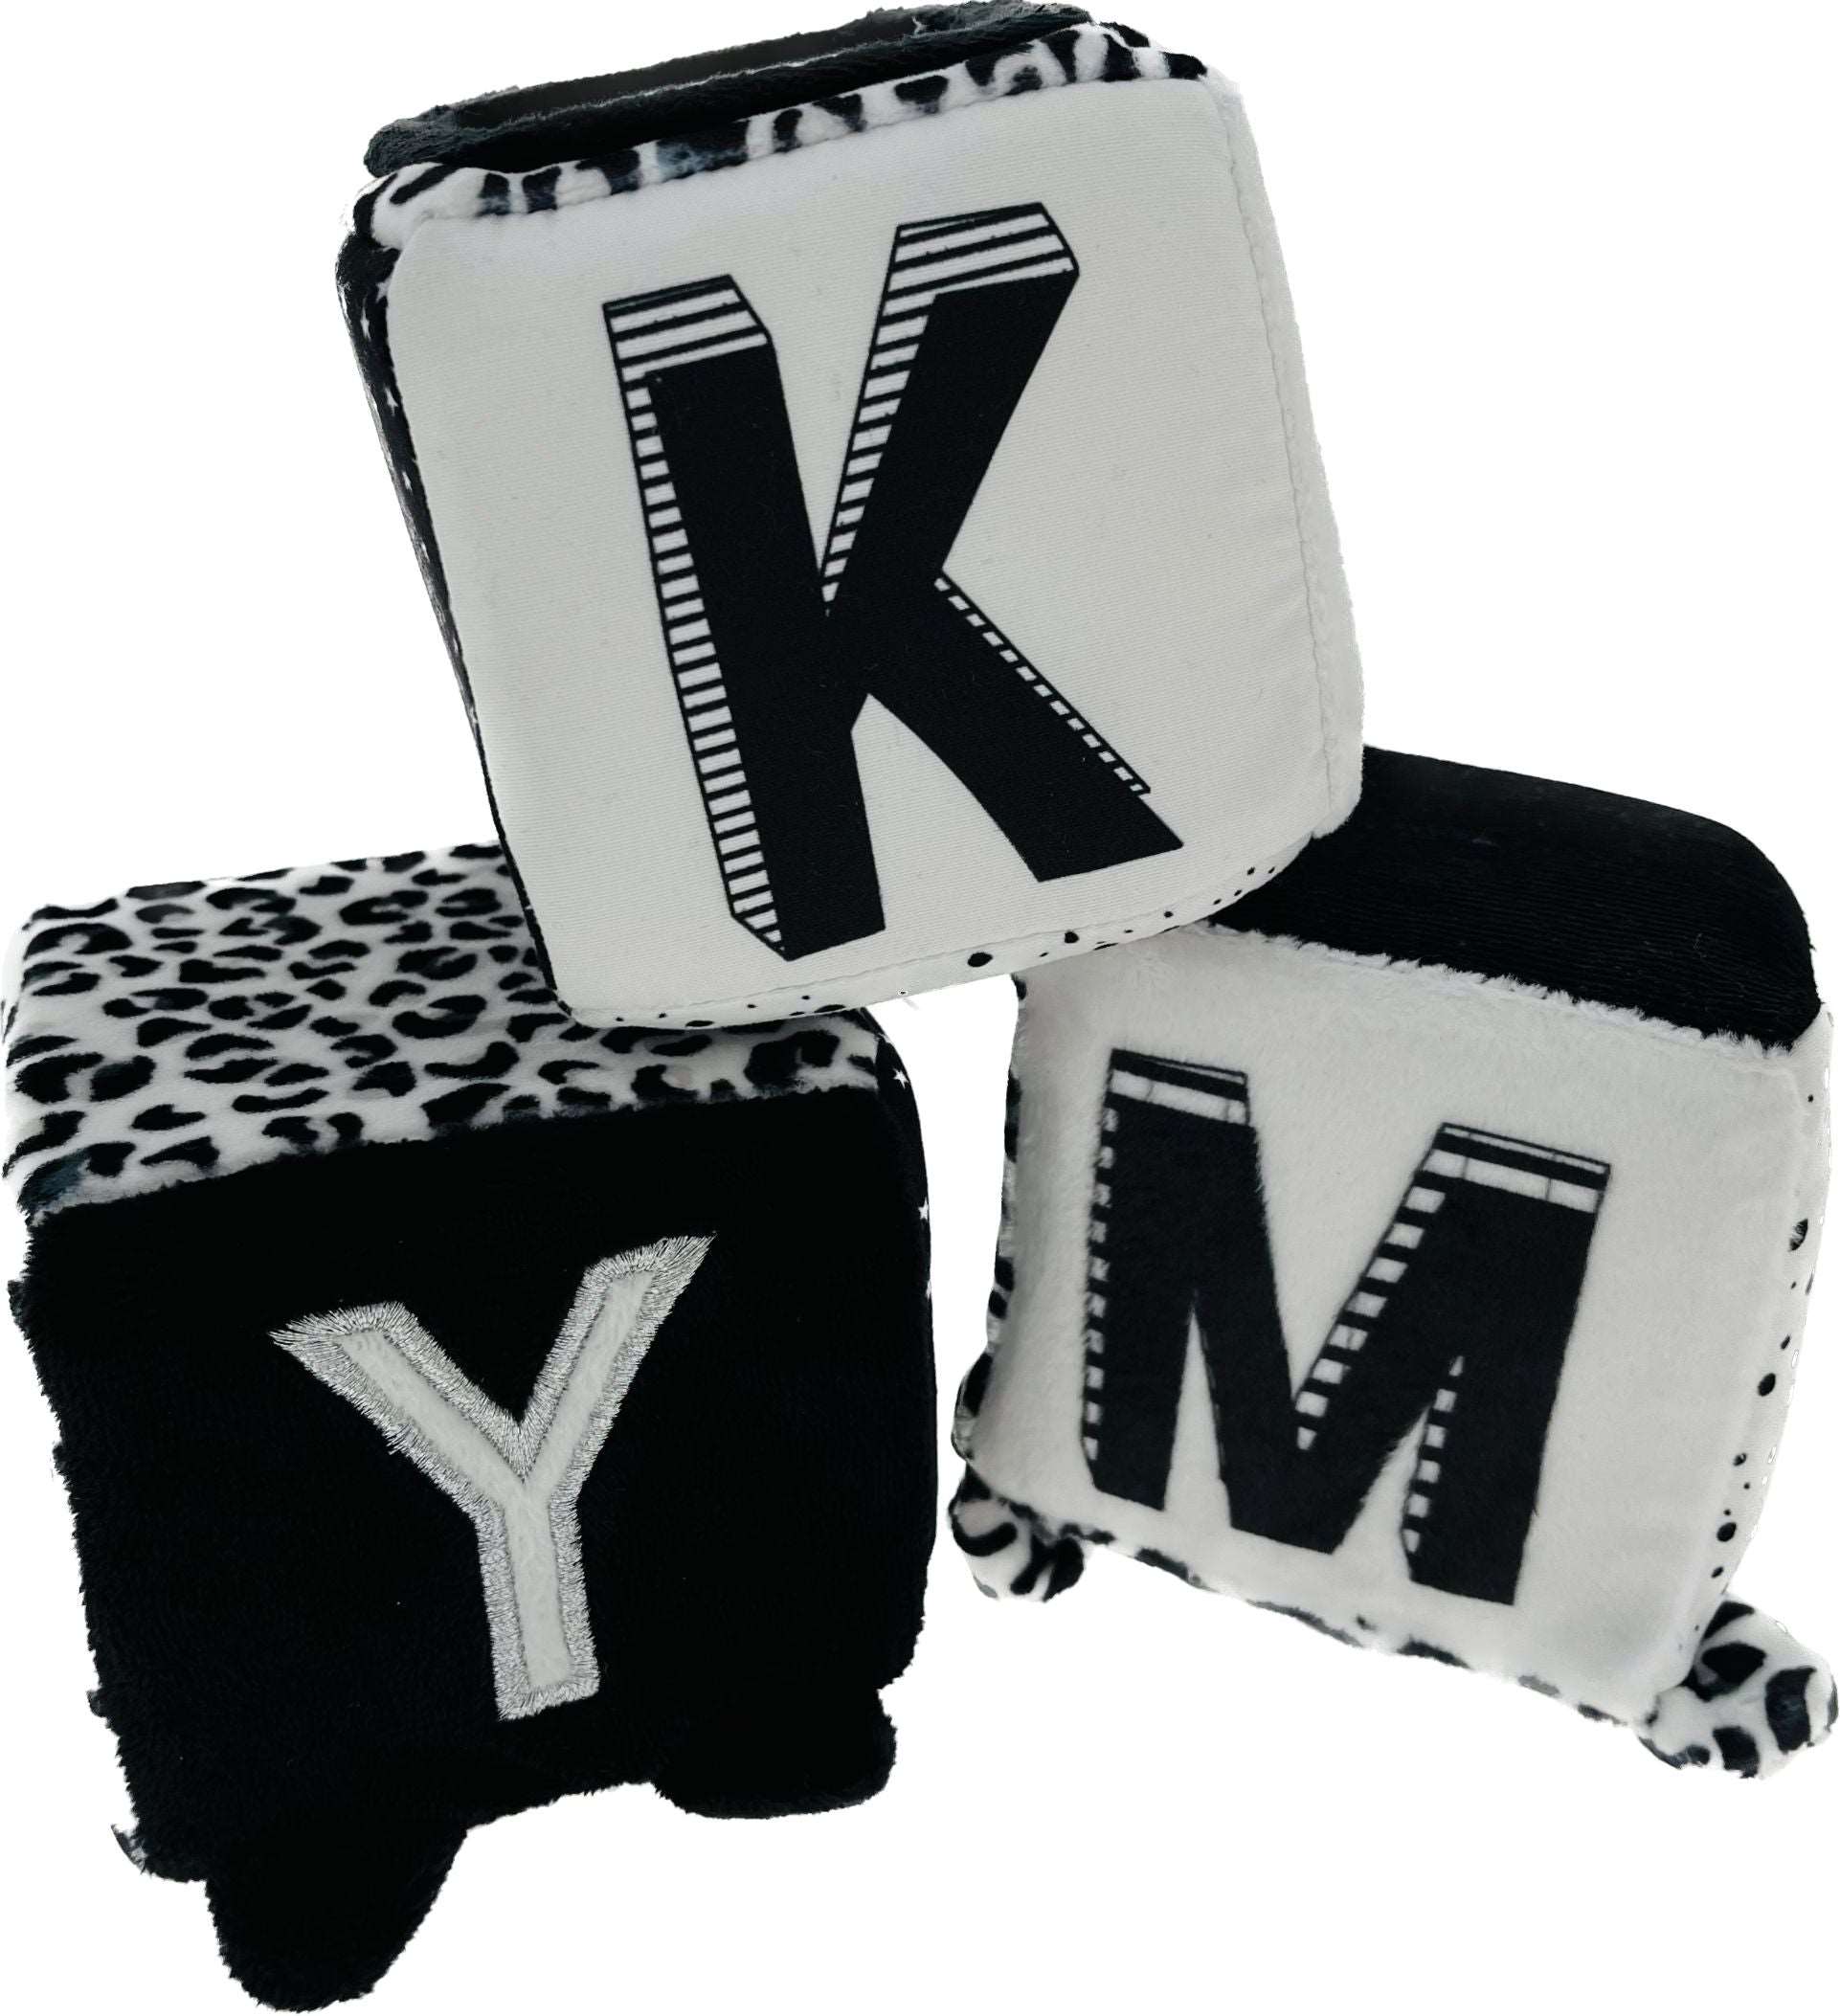 Mothercare Black and White Baby Senosory Cubes. Set of 3 Cubes